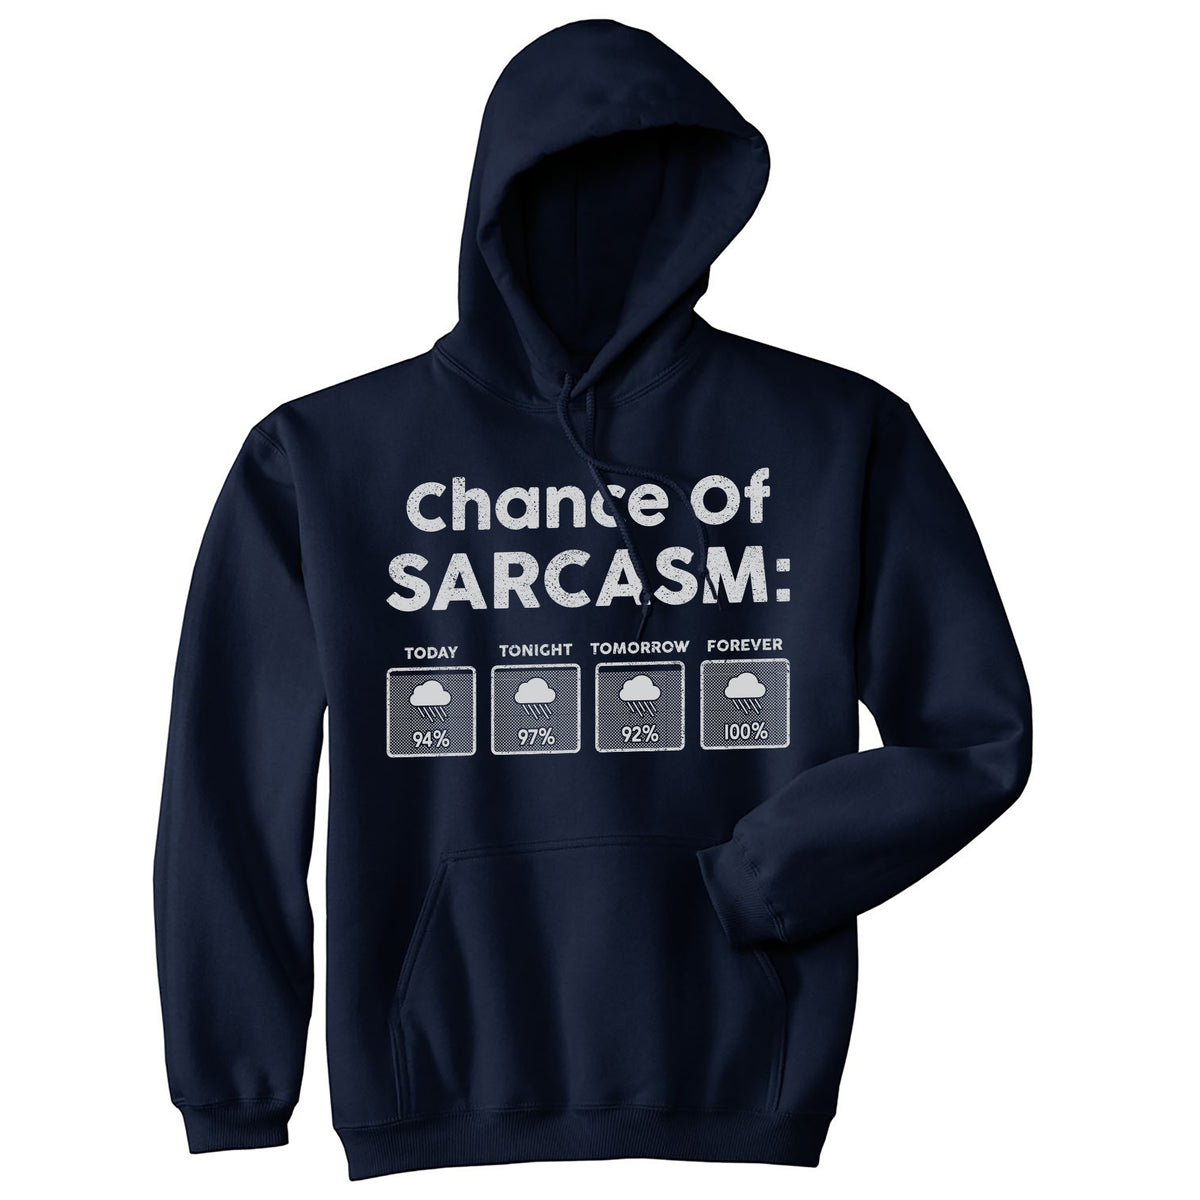 Funny Navy - Chance Of Sarcasm Chance Of Sarcasm Hoodie Nerdy Sarcastic Tee